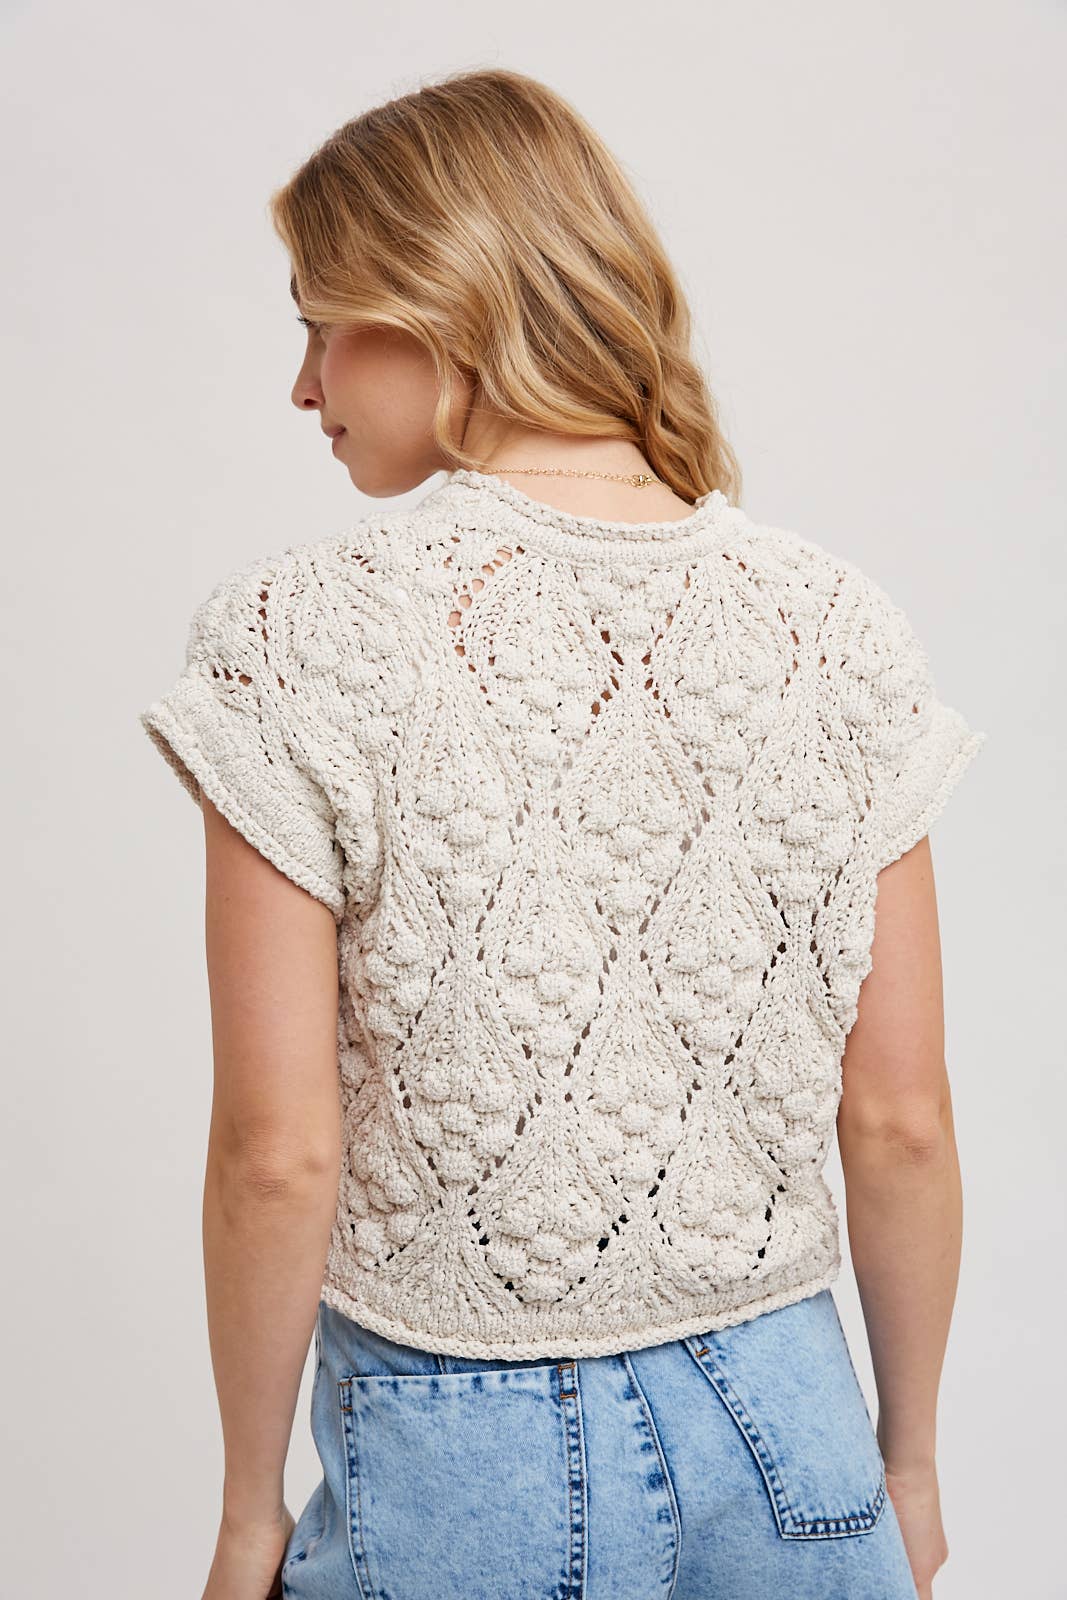 Knit Sweater Short Sleeved Pullover